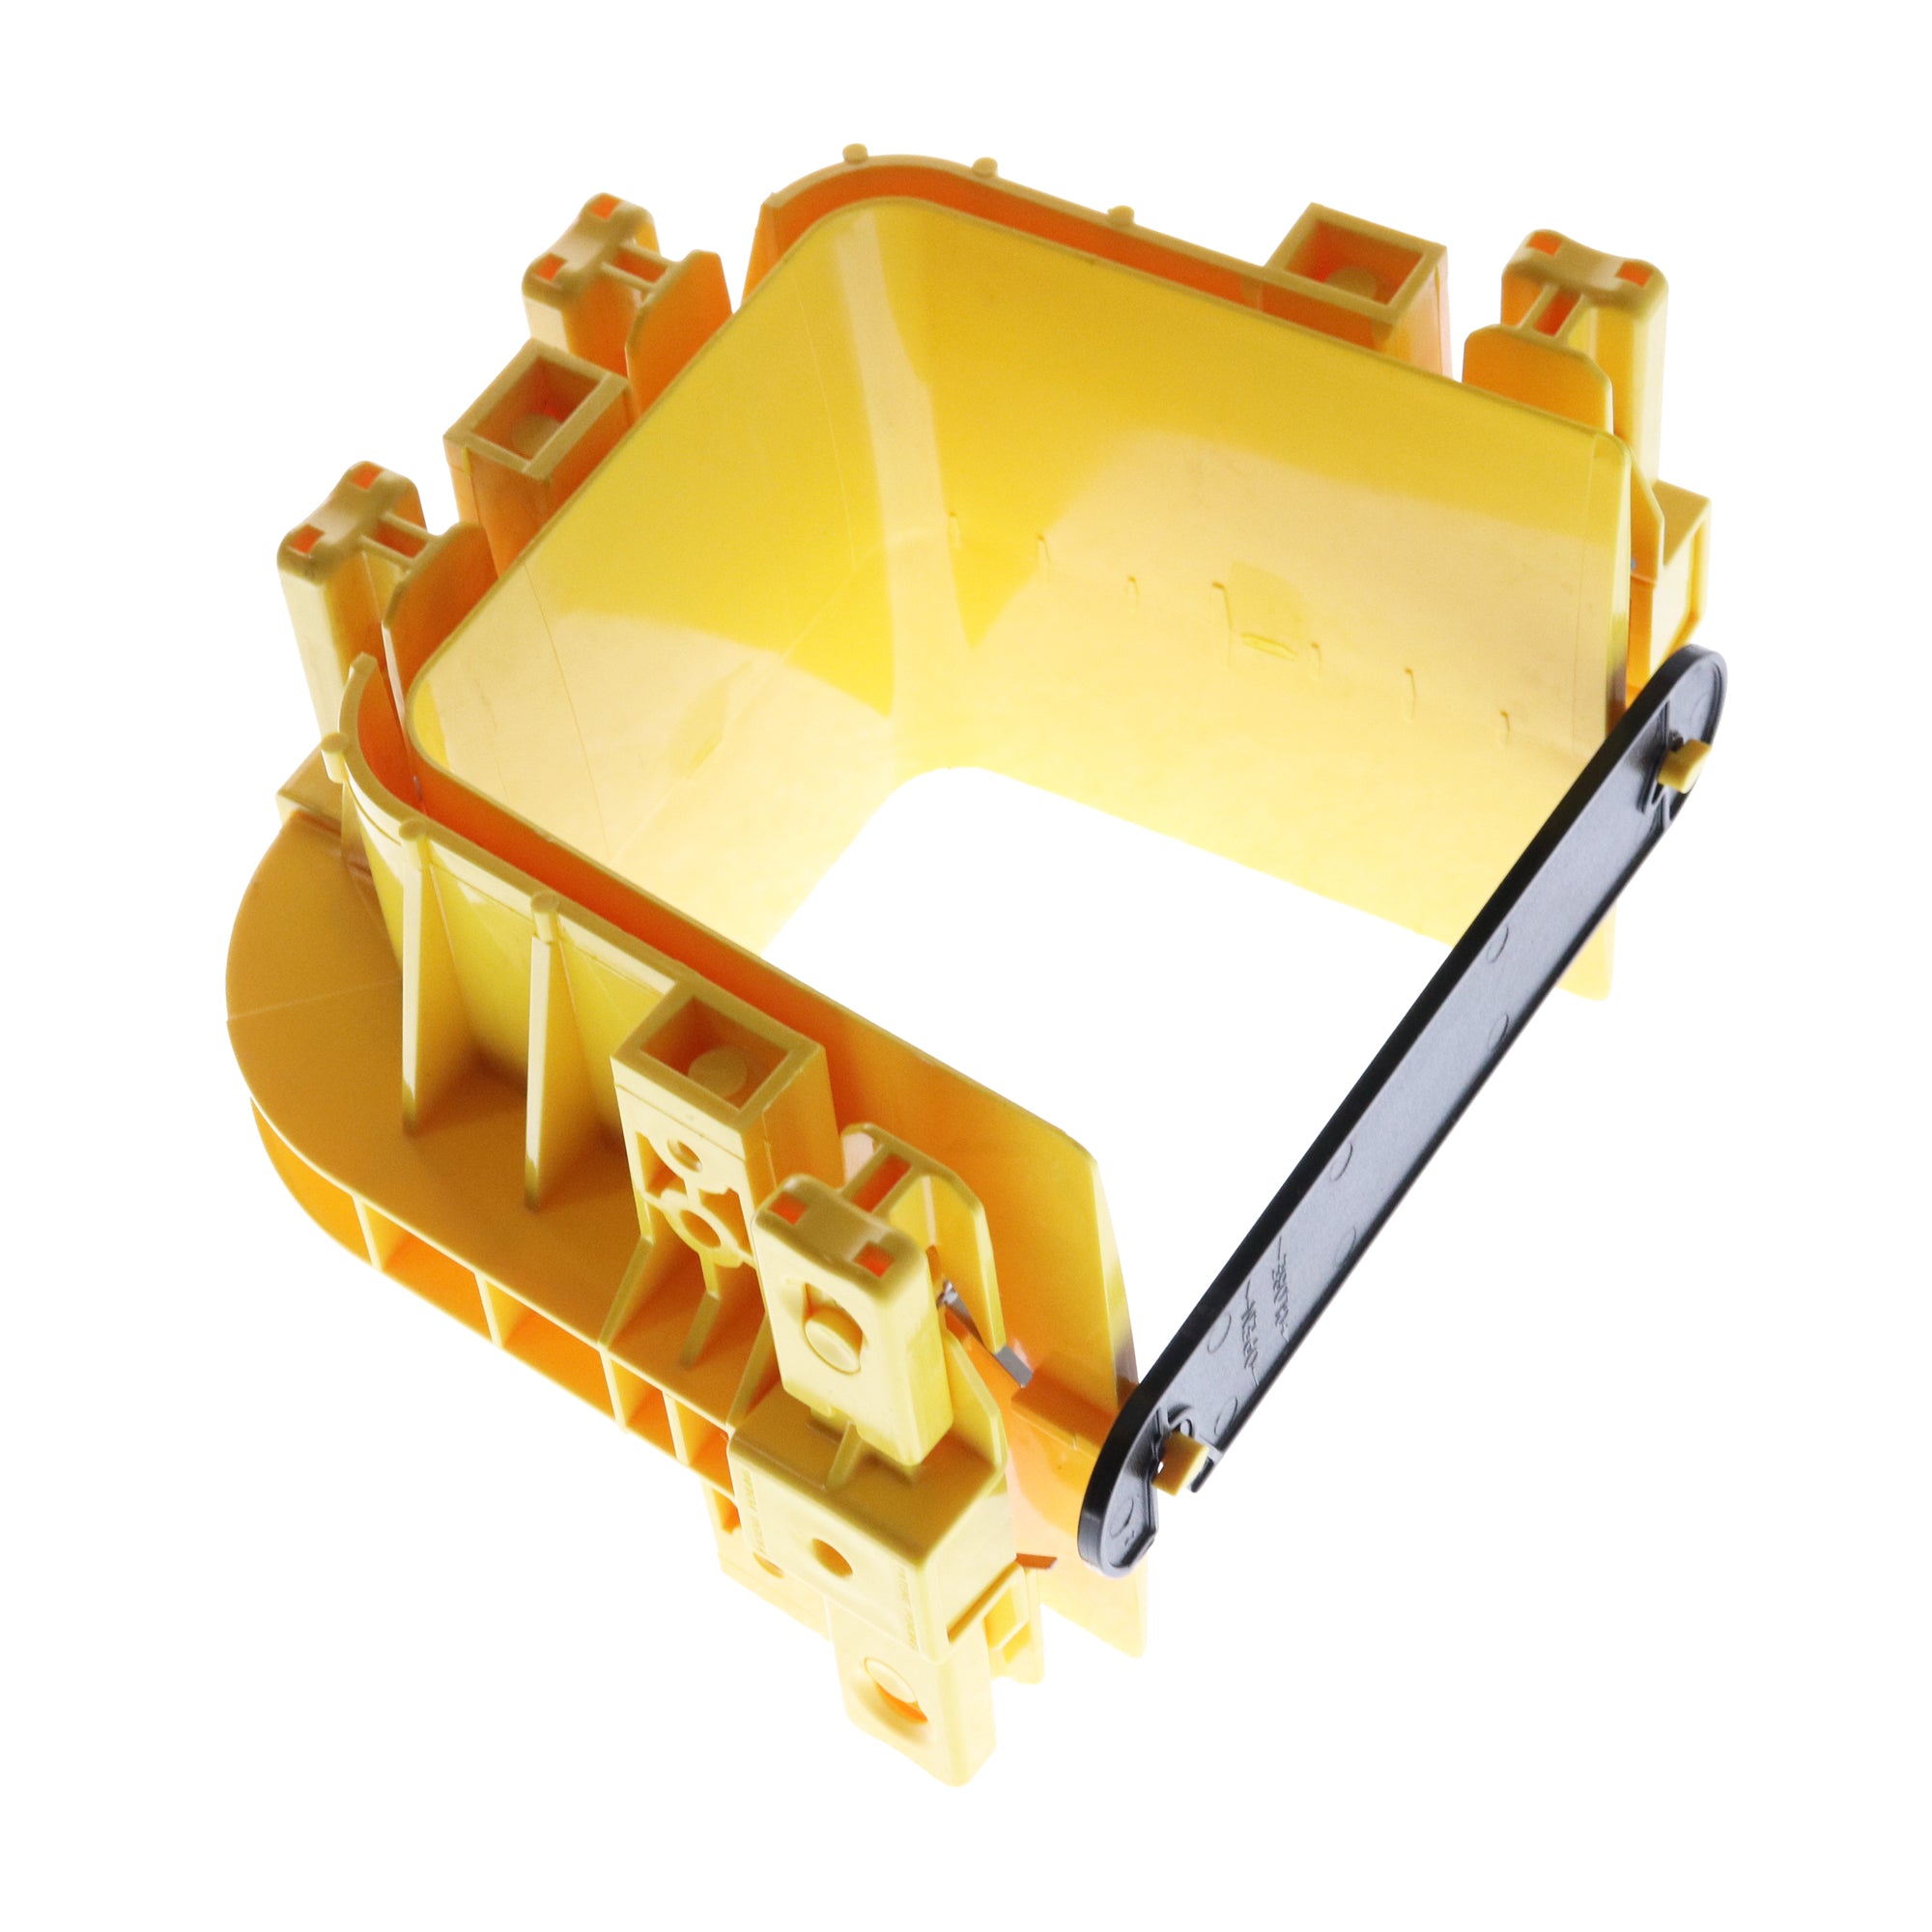 ADC, ADC COMMSCOPE FGS-MFAW-A FIBERGUIDE 4X4" SNAP-FIT RACEWAY JUNCTION, YELLOW